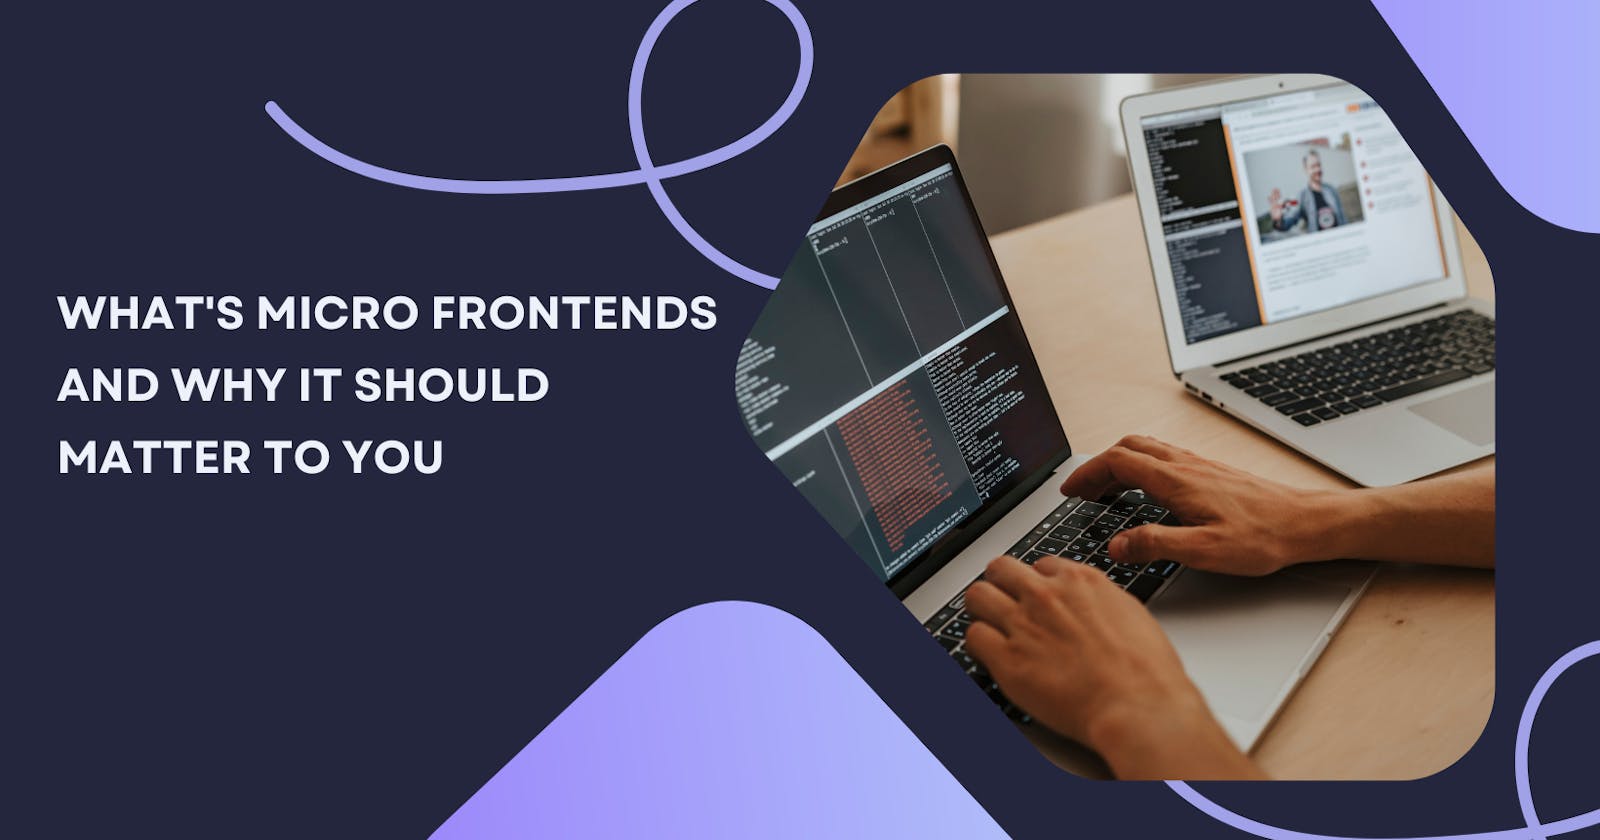 What's Micro Frontends and Why It Should Matter to You